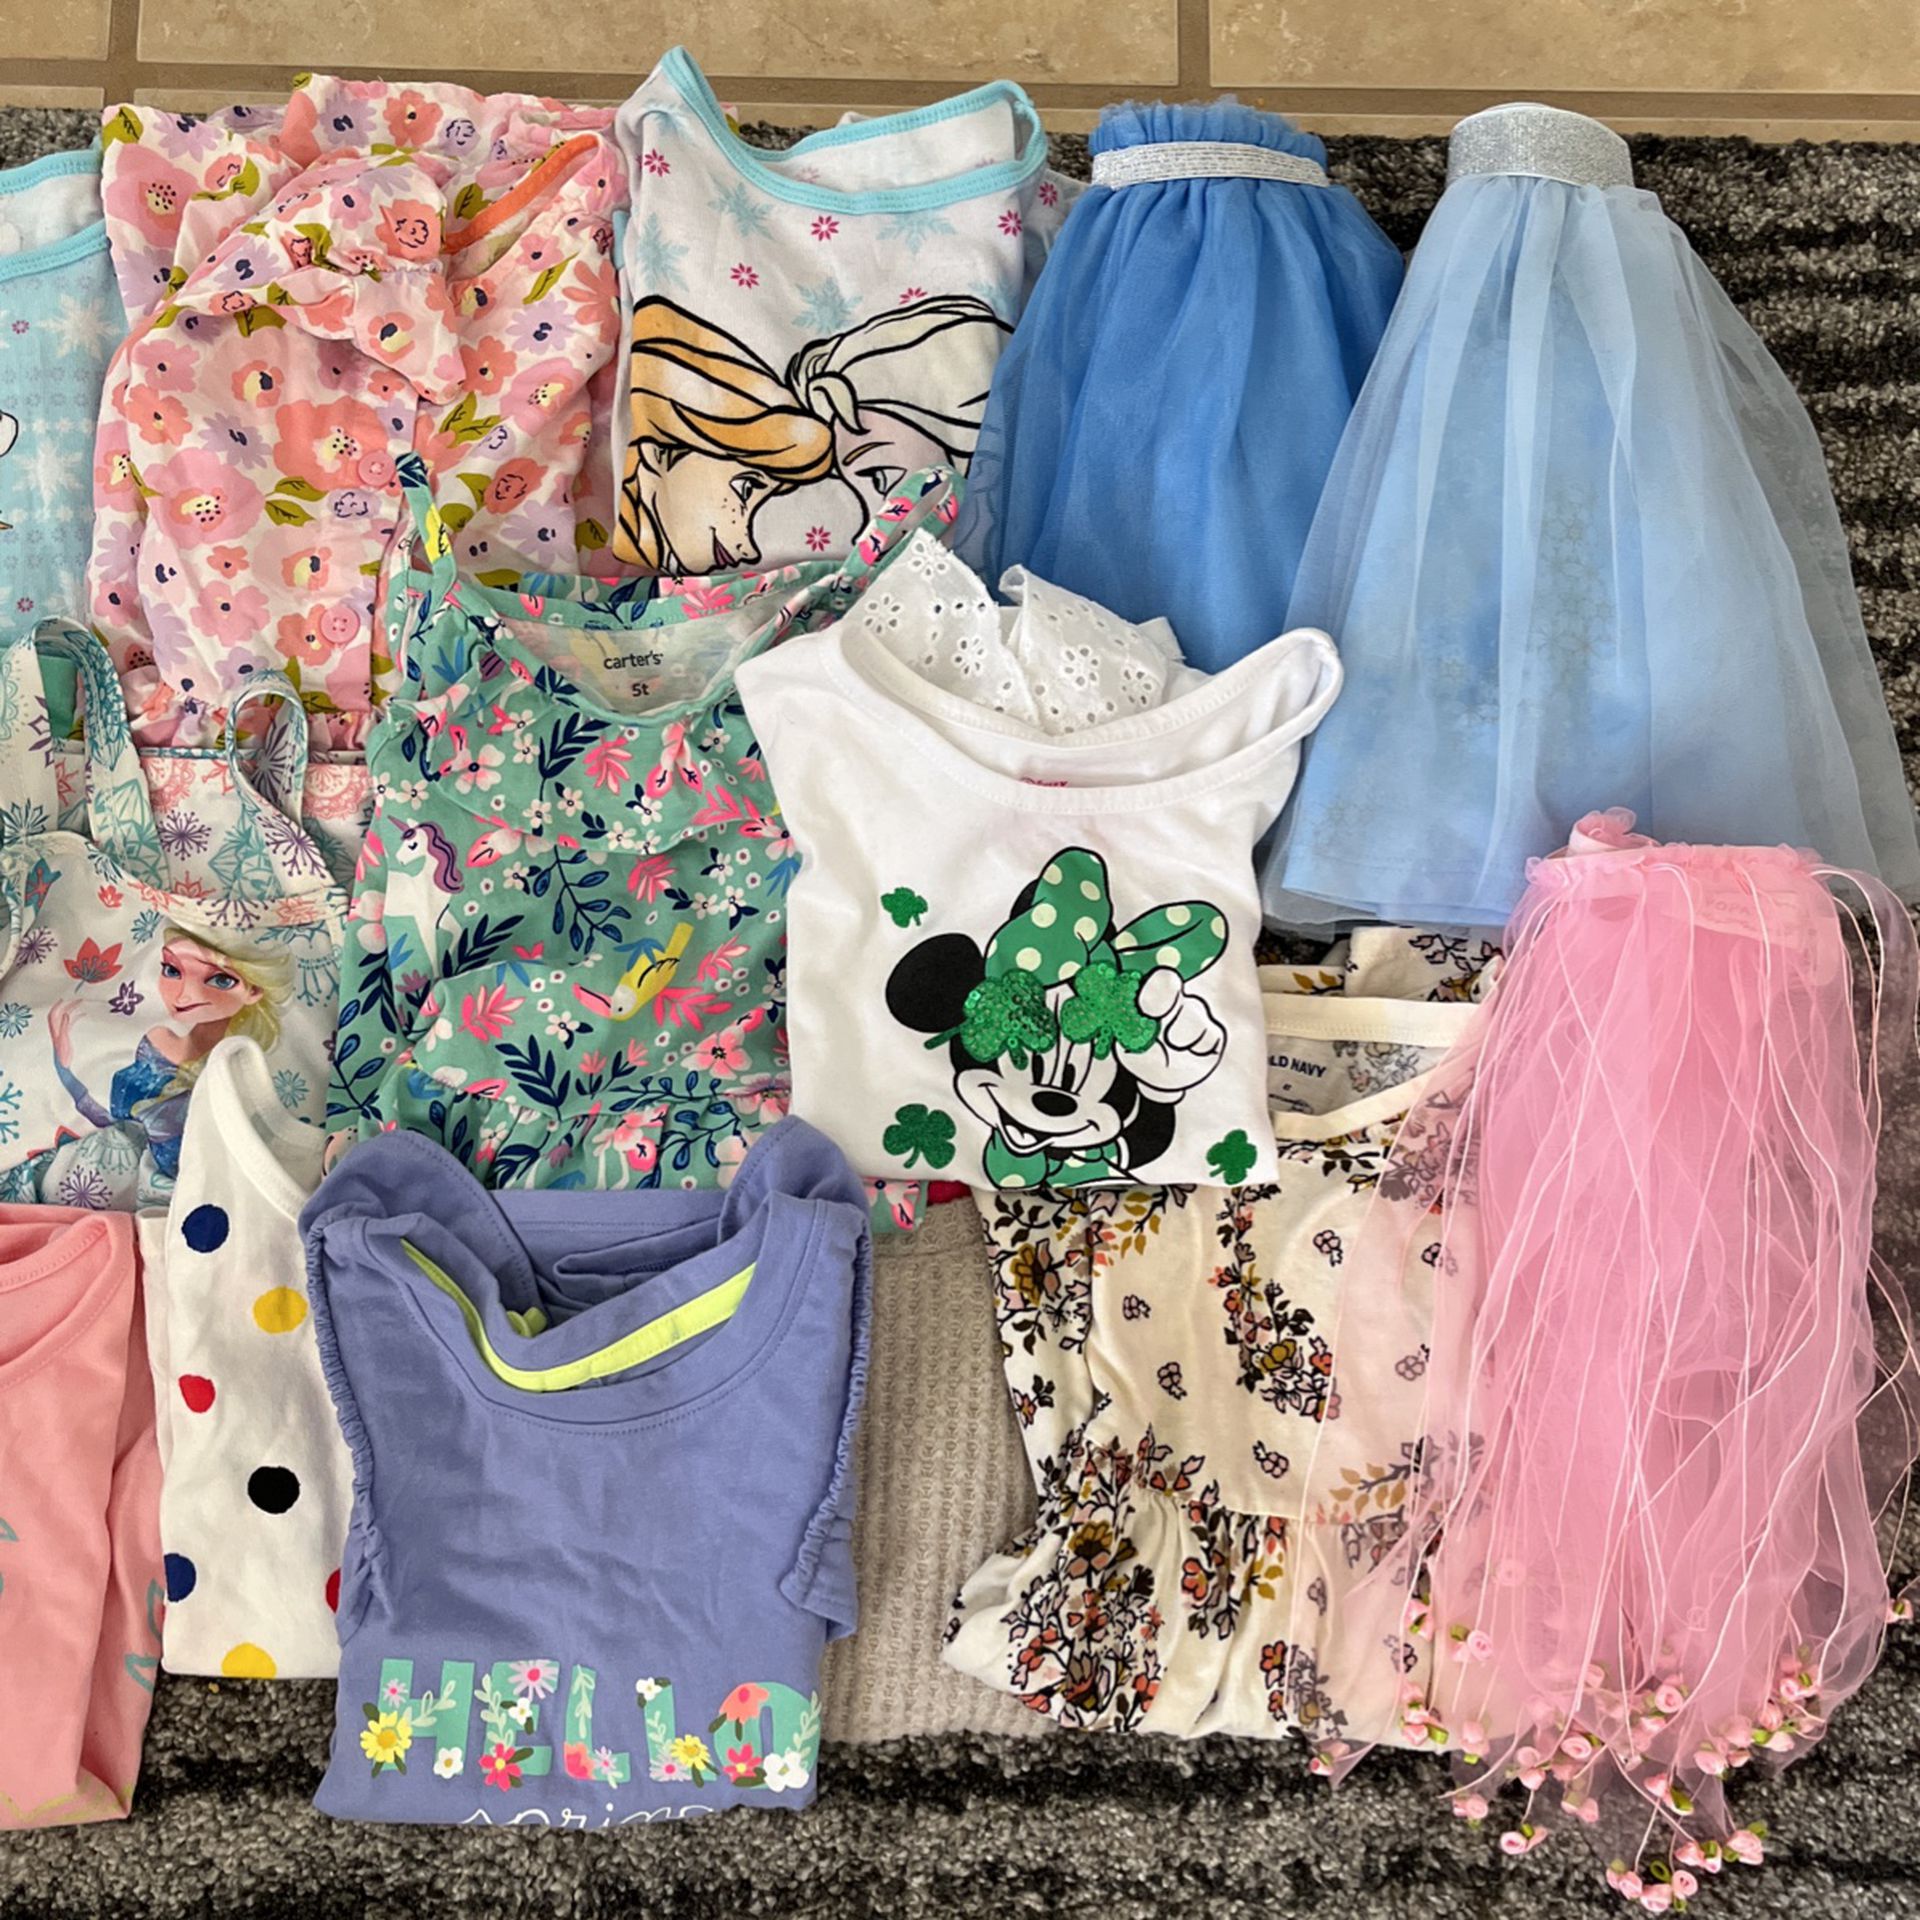 Girls clothes for Sale in Murrieta, CA - OfferUp